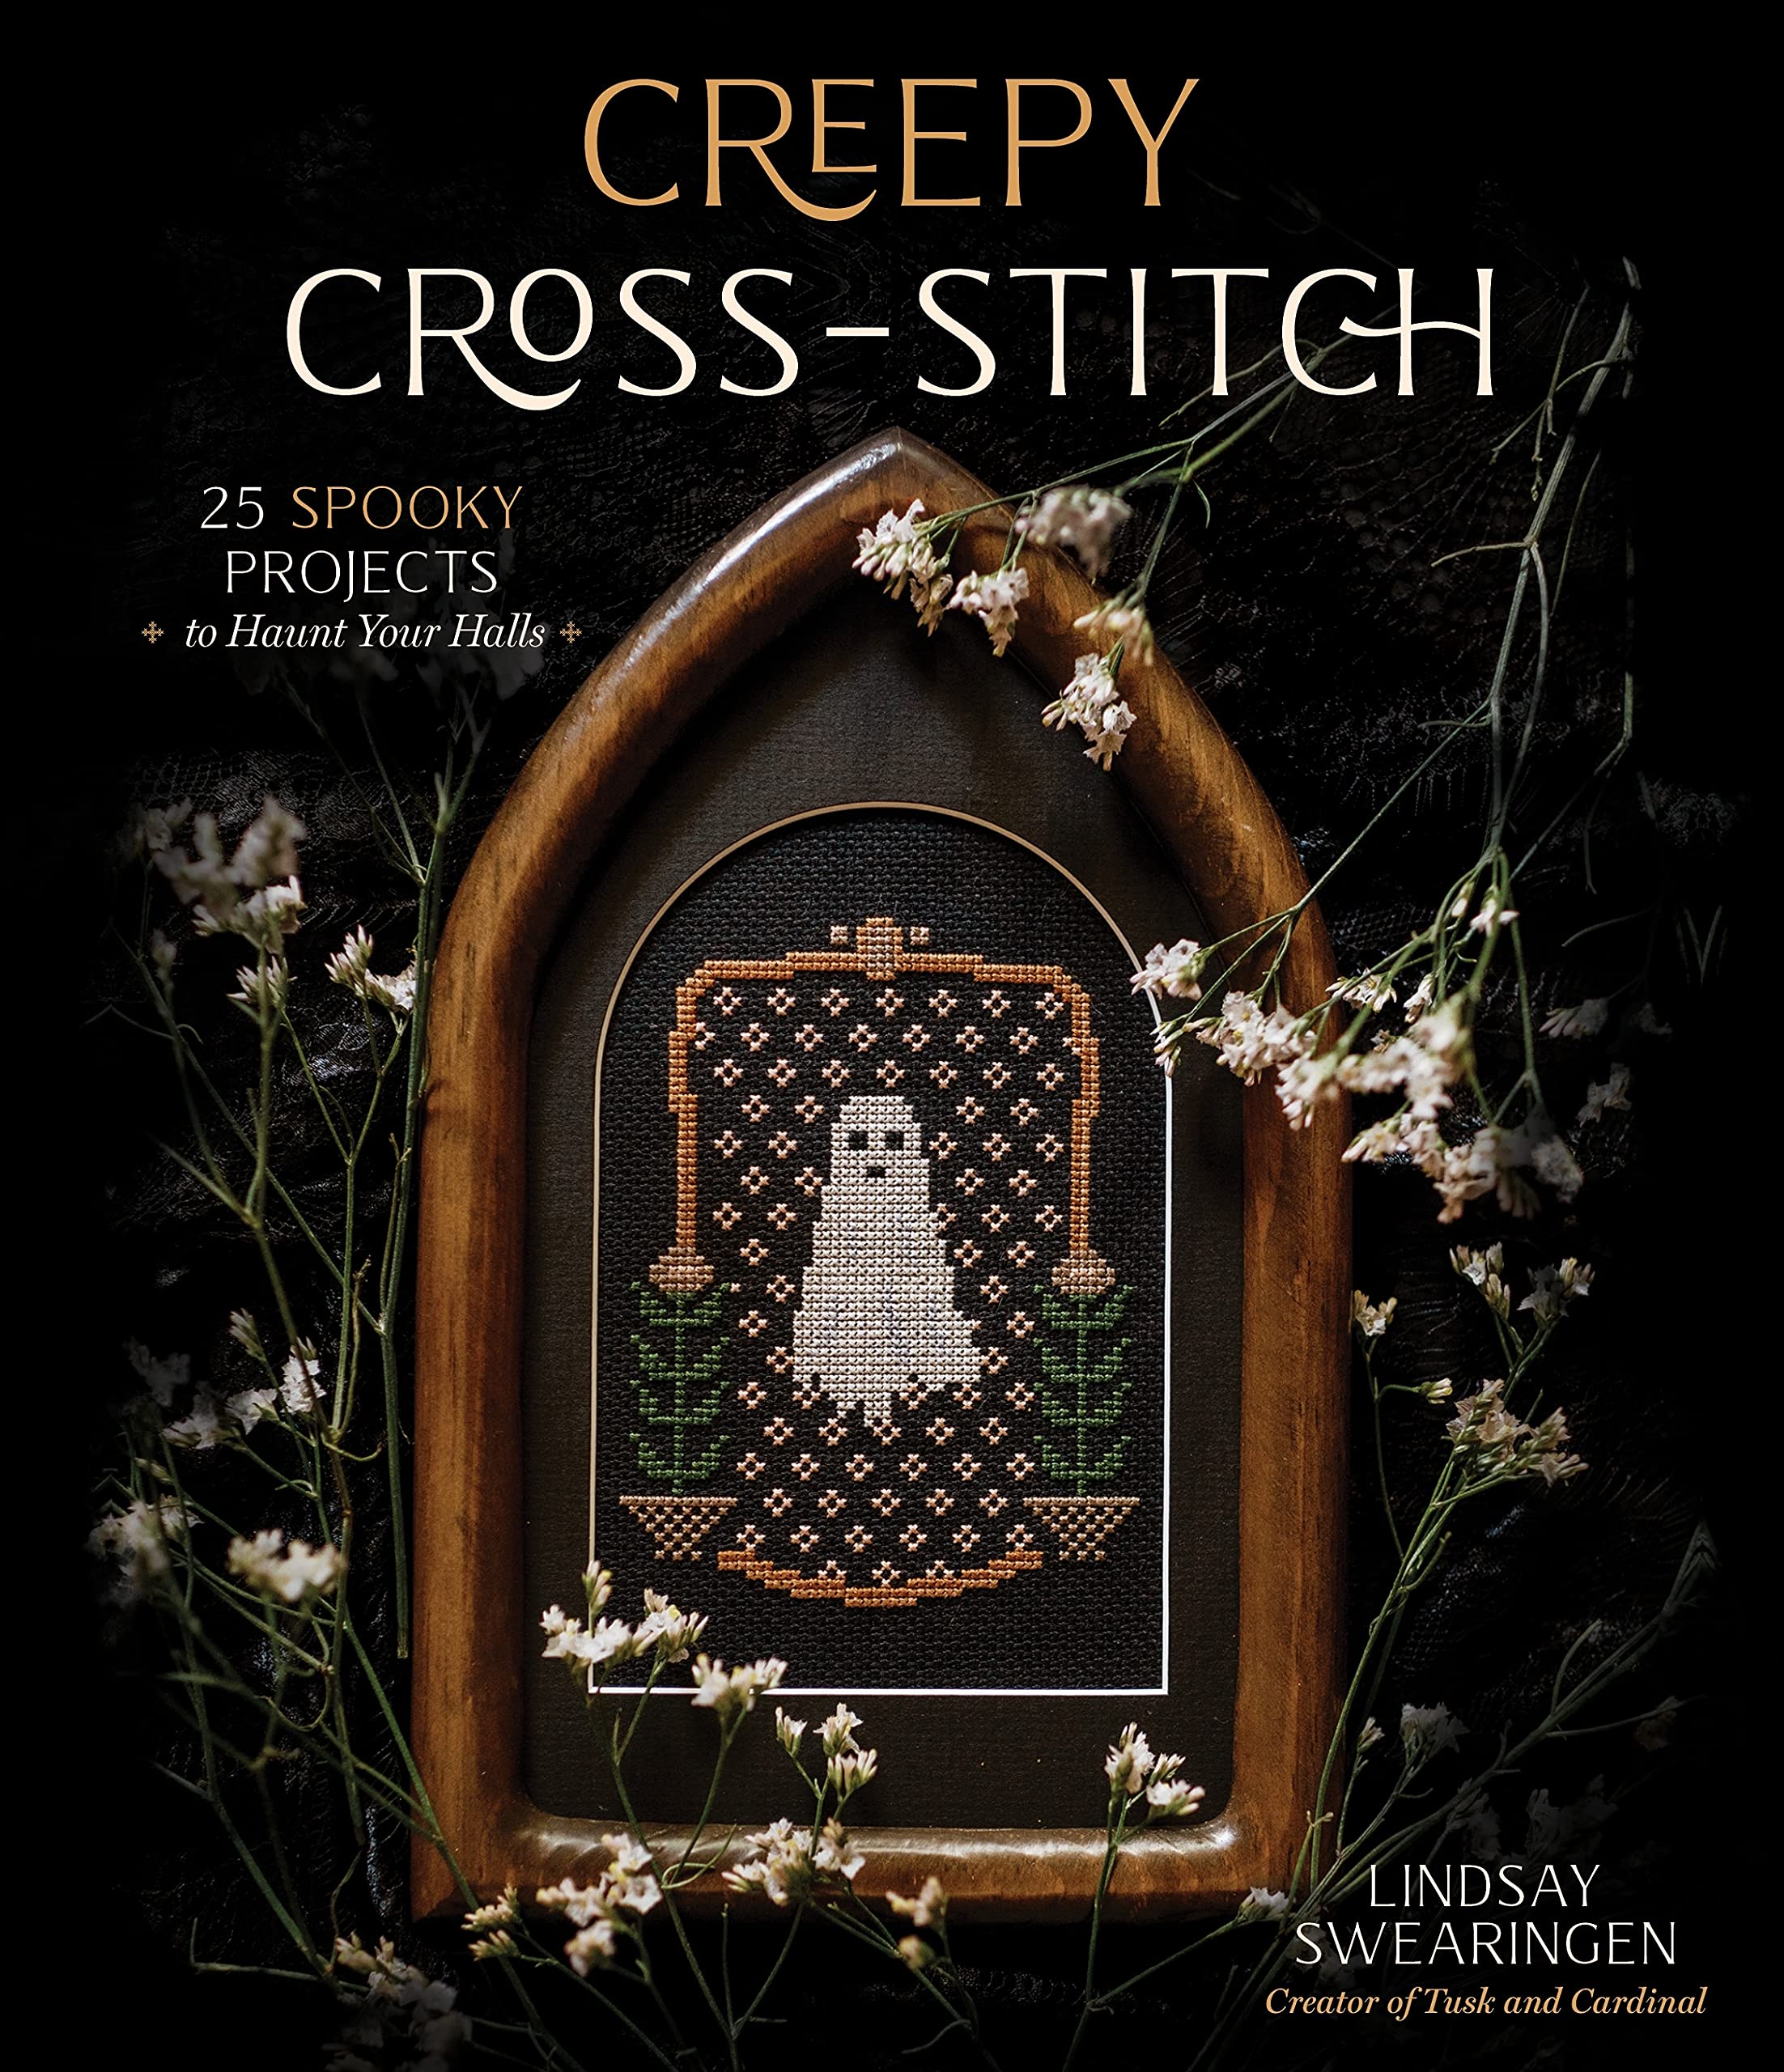 Creepy Cross-Stitch: 25 Spooky Projects to Haunt Your Halls (Paperback)